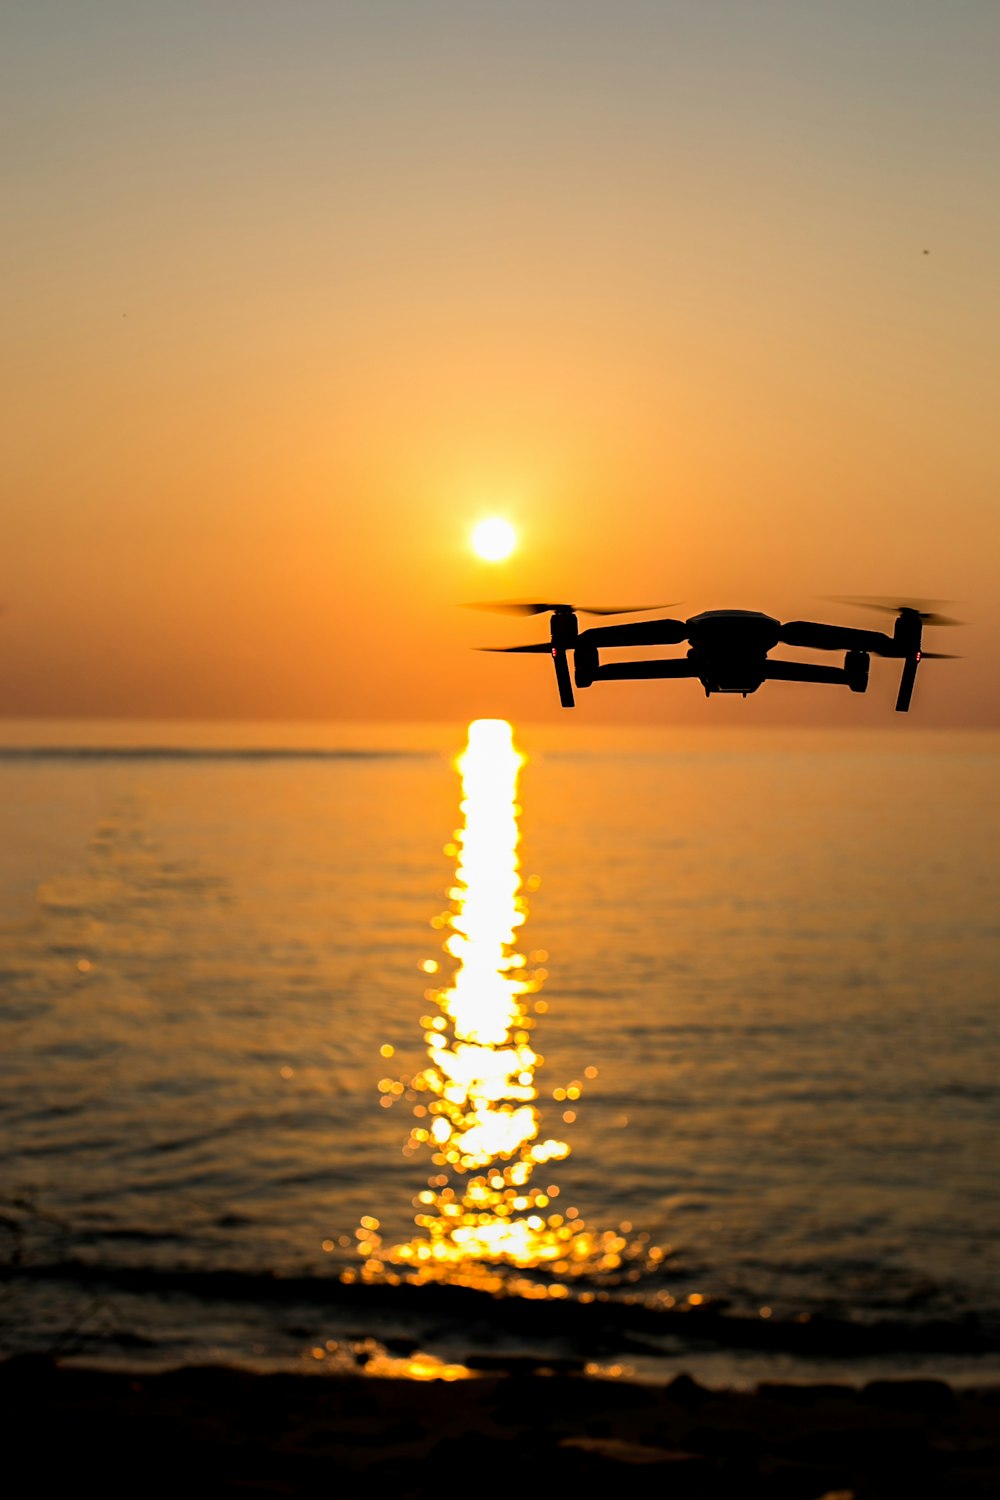 black drone flying over the sea during sunset